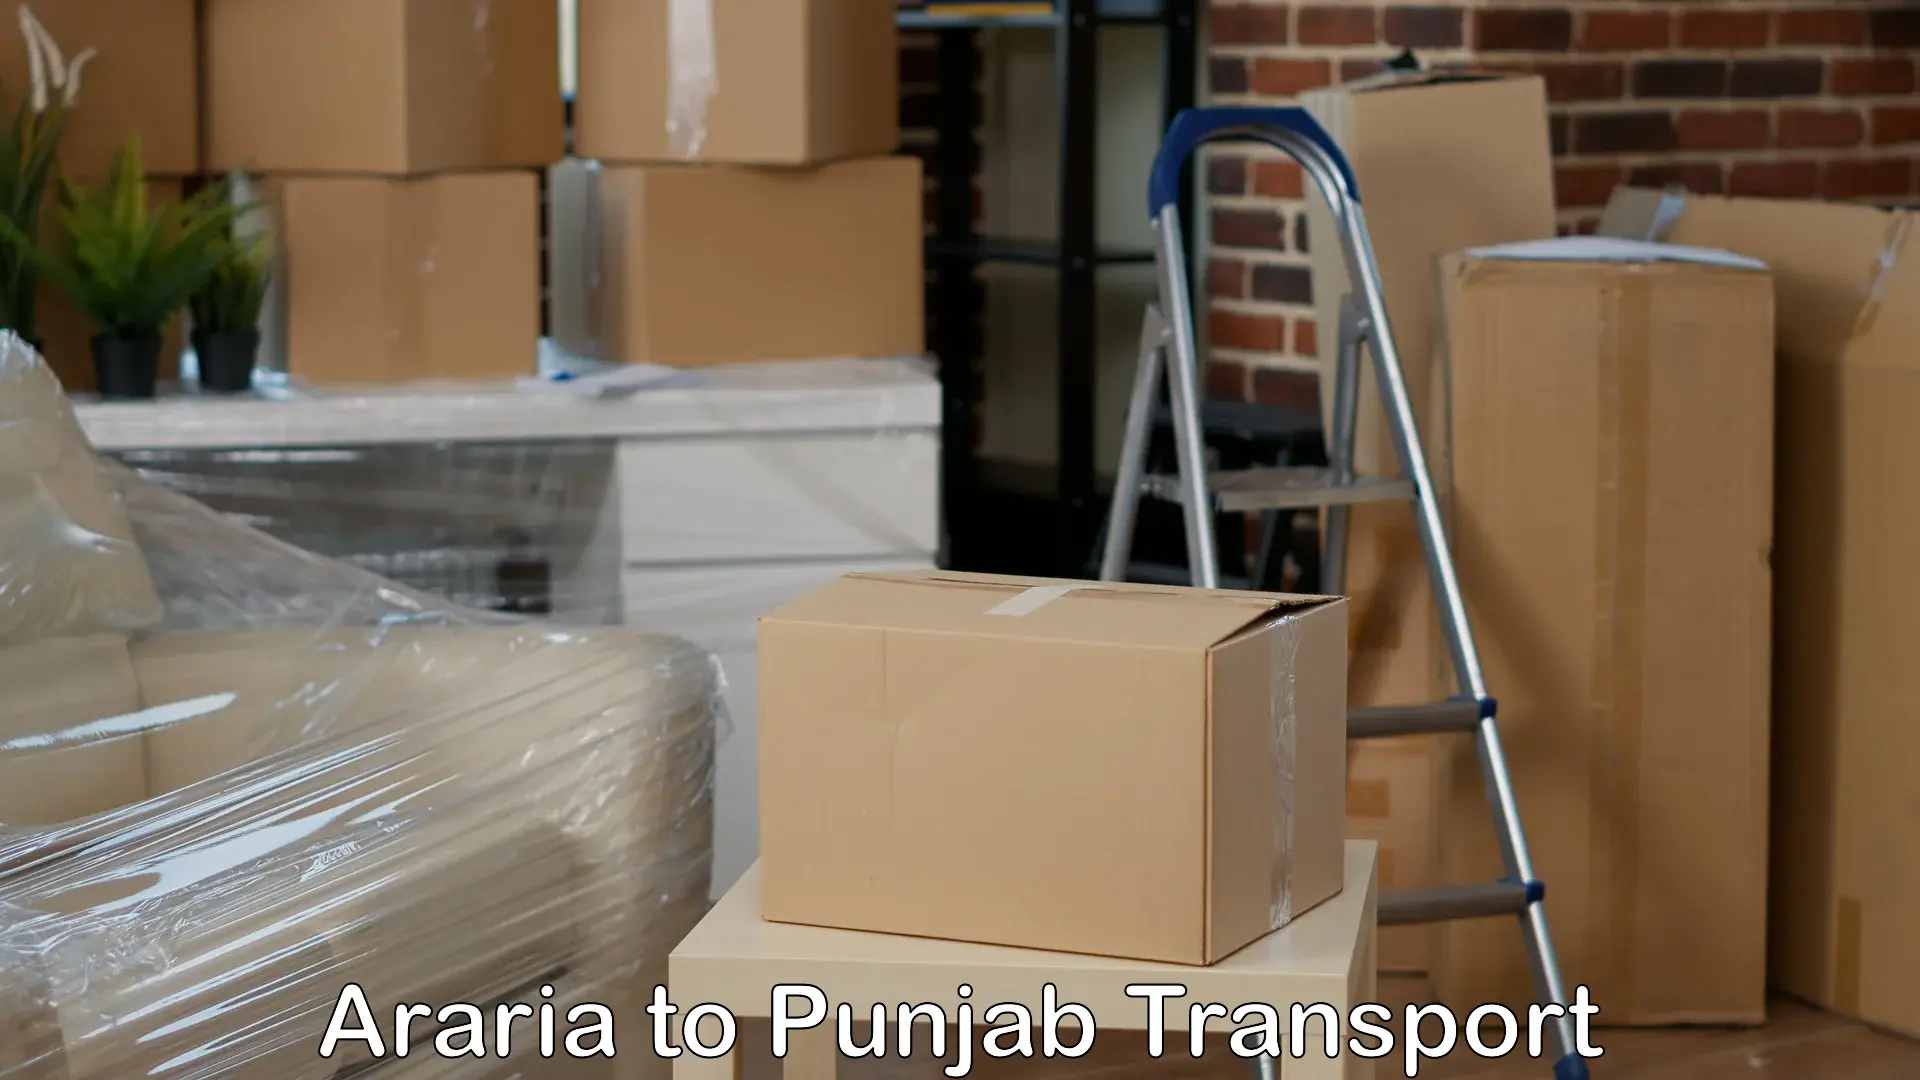 Commercial transport service Araria to Nabha